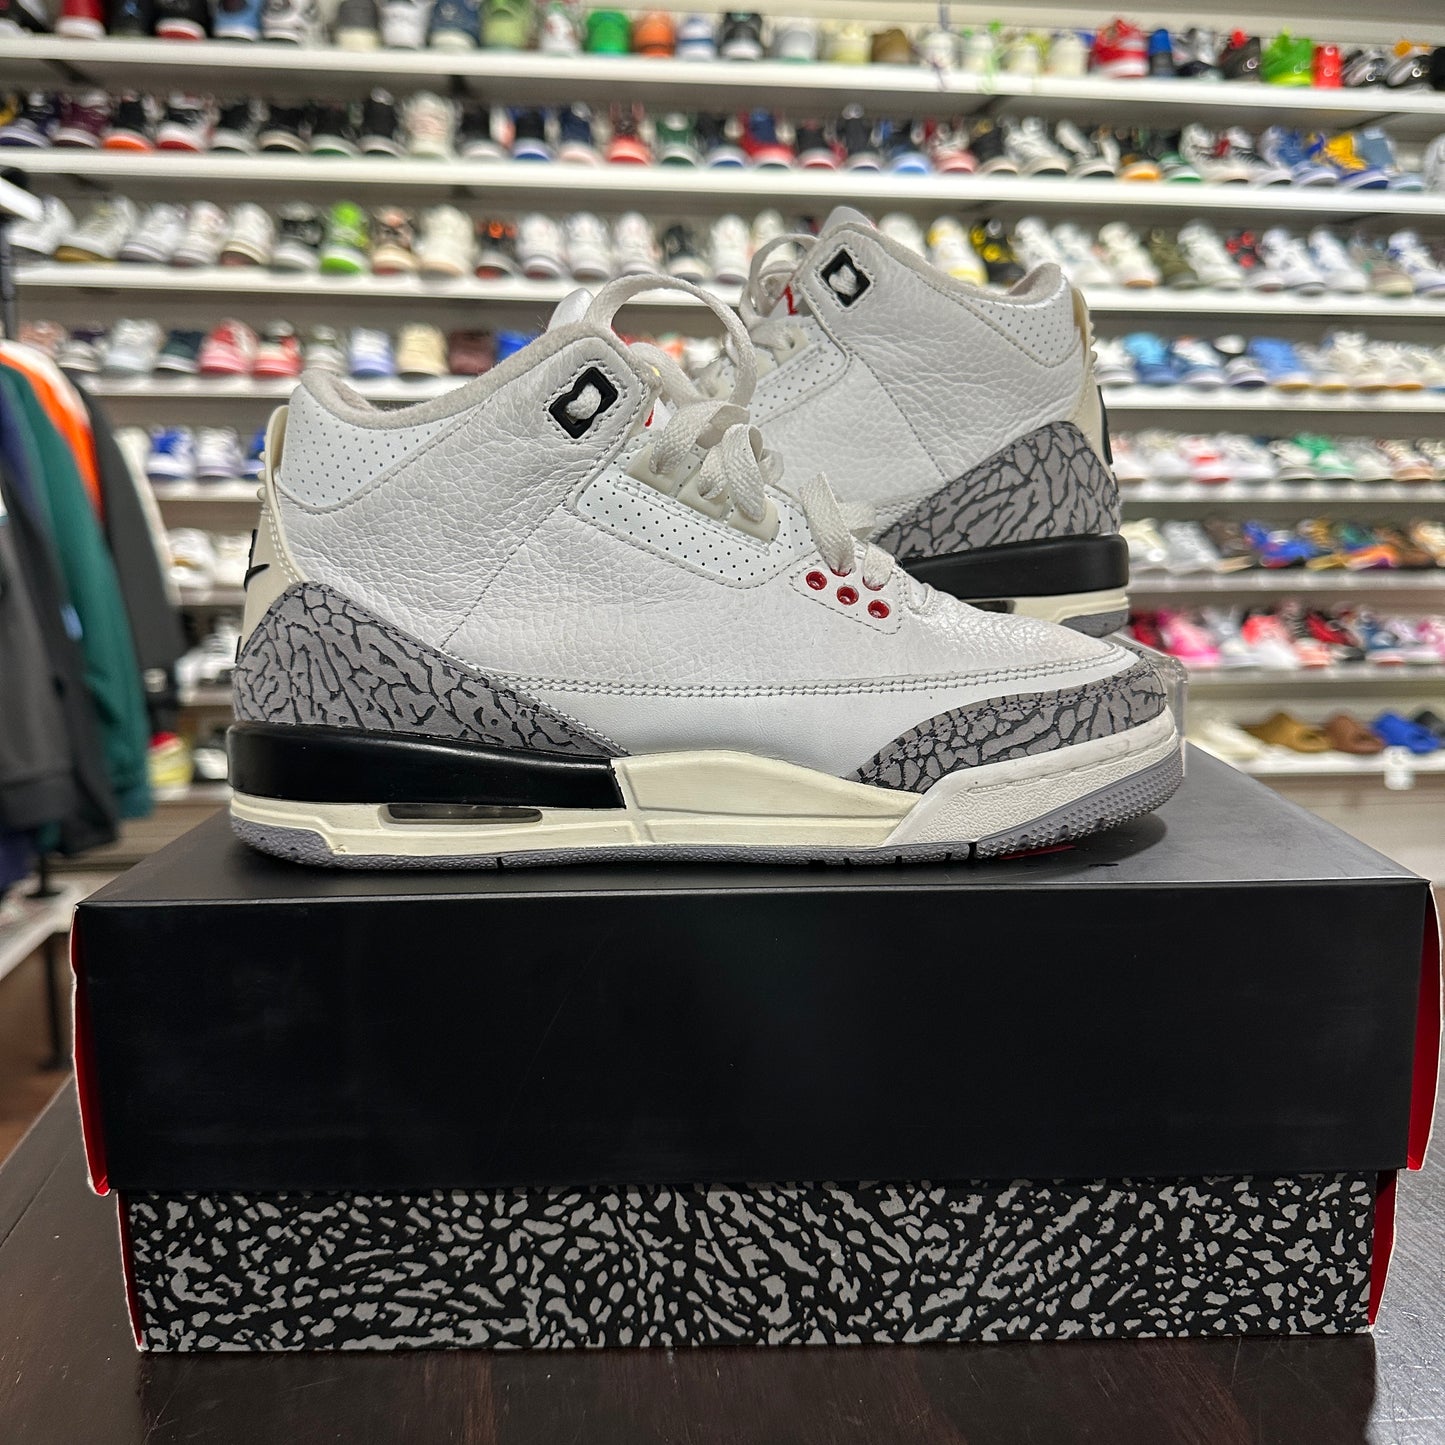 *USED* Air Jordan 3 Reimagined White Cement (size 5.5y)